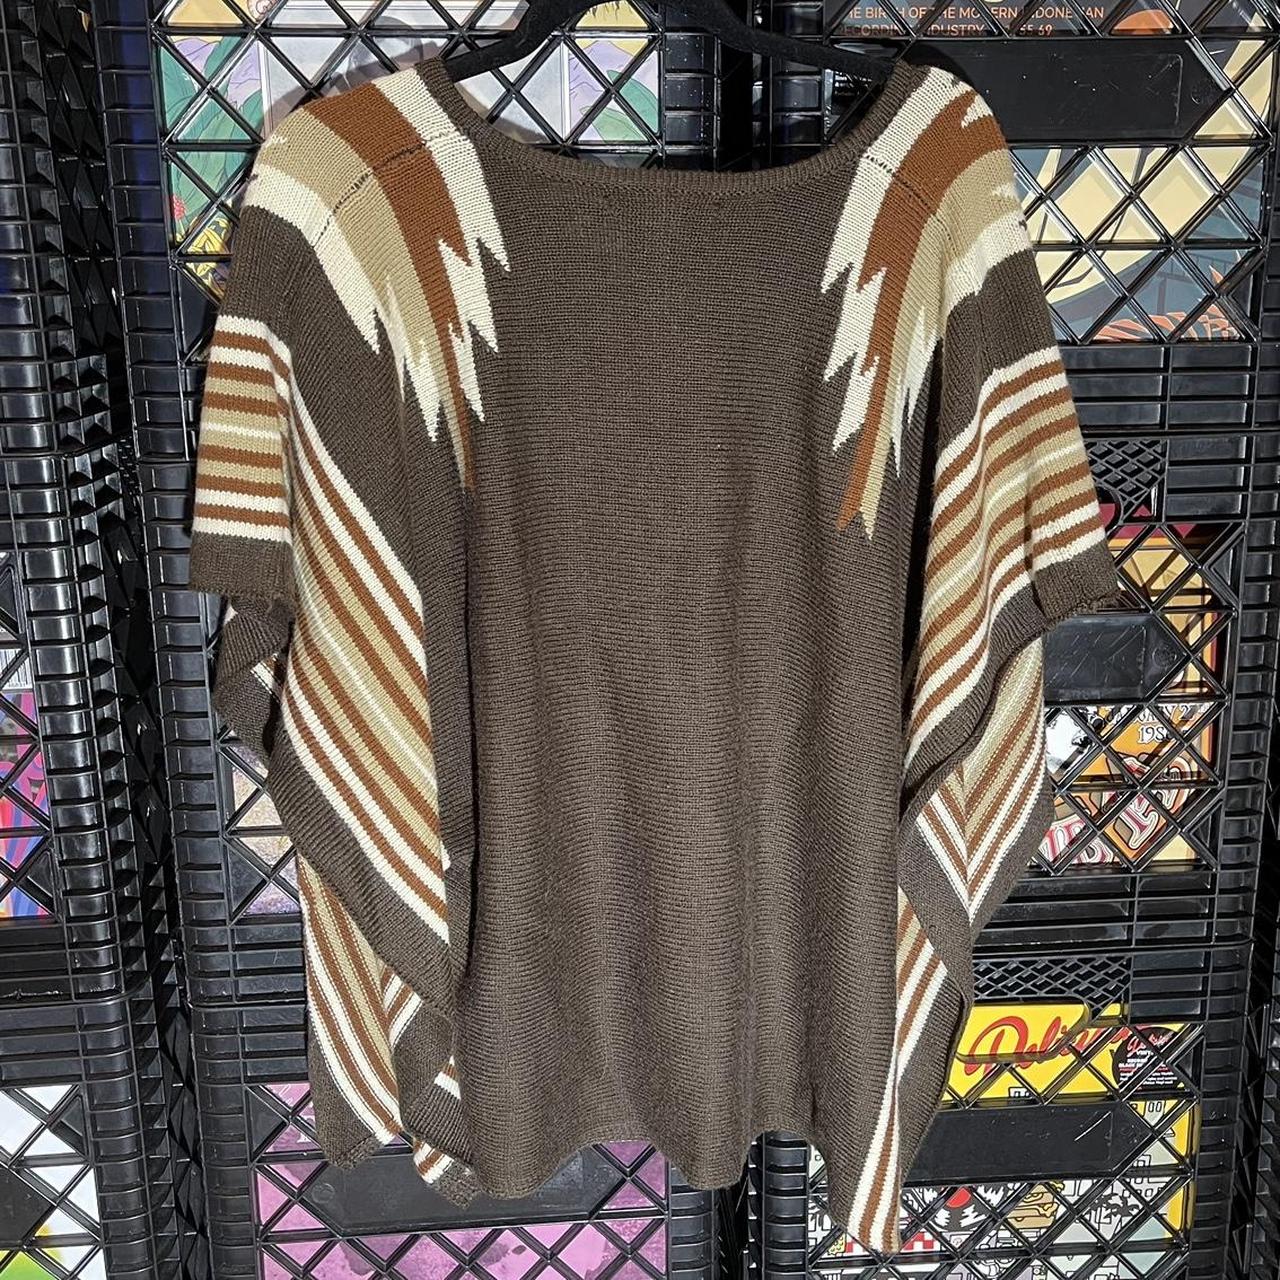 You can't be sad in a poncho, brown beige cream tan - Depop